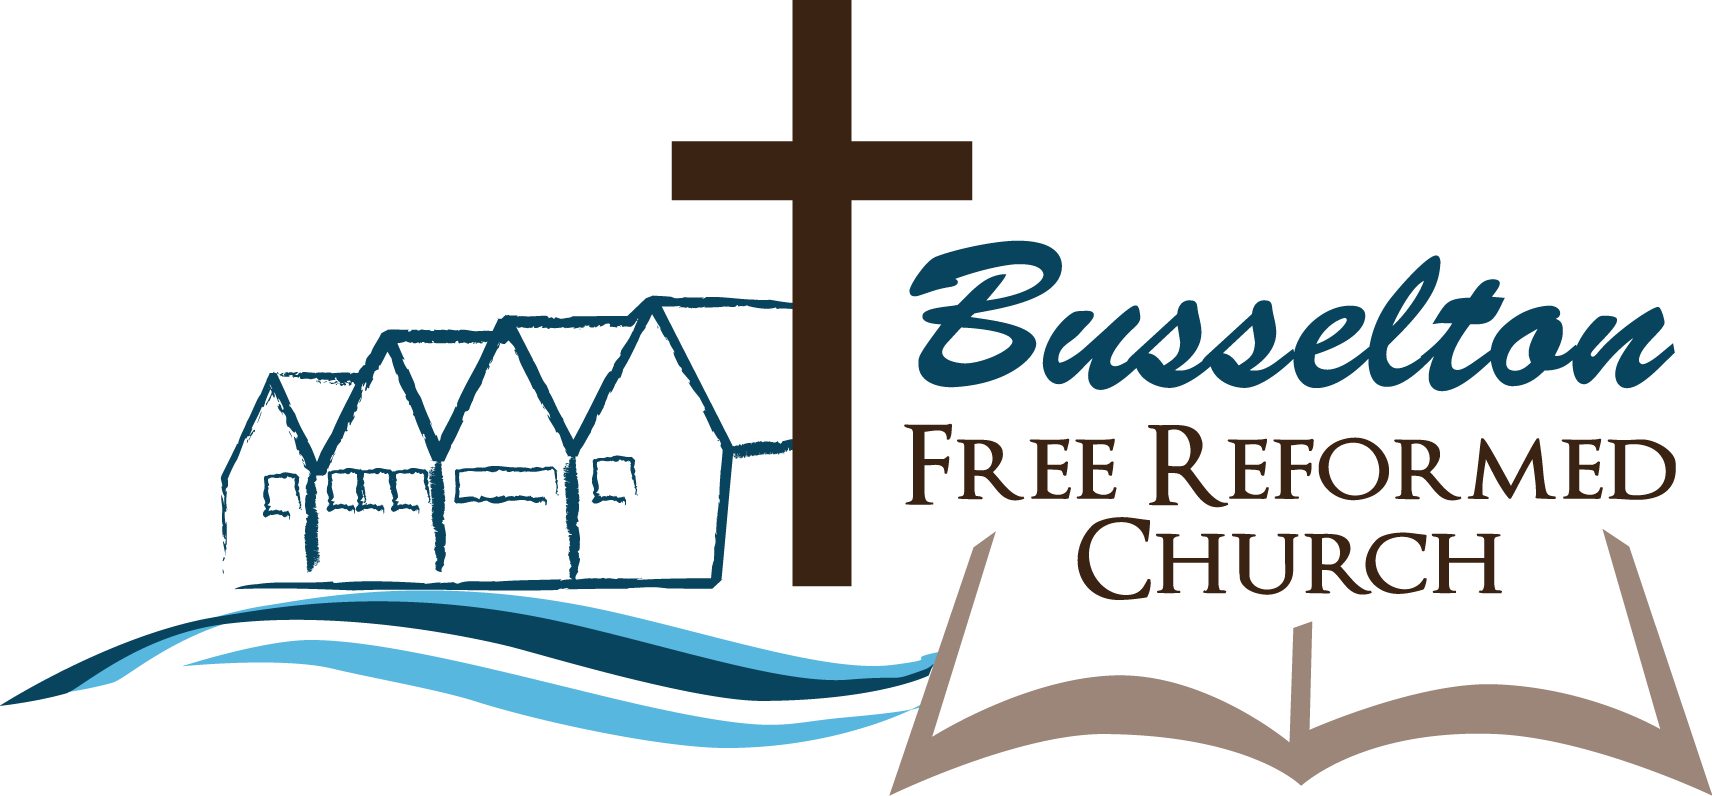 Free Reformed Church of Busselton